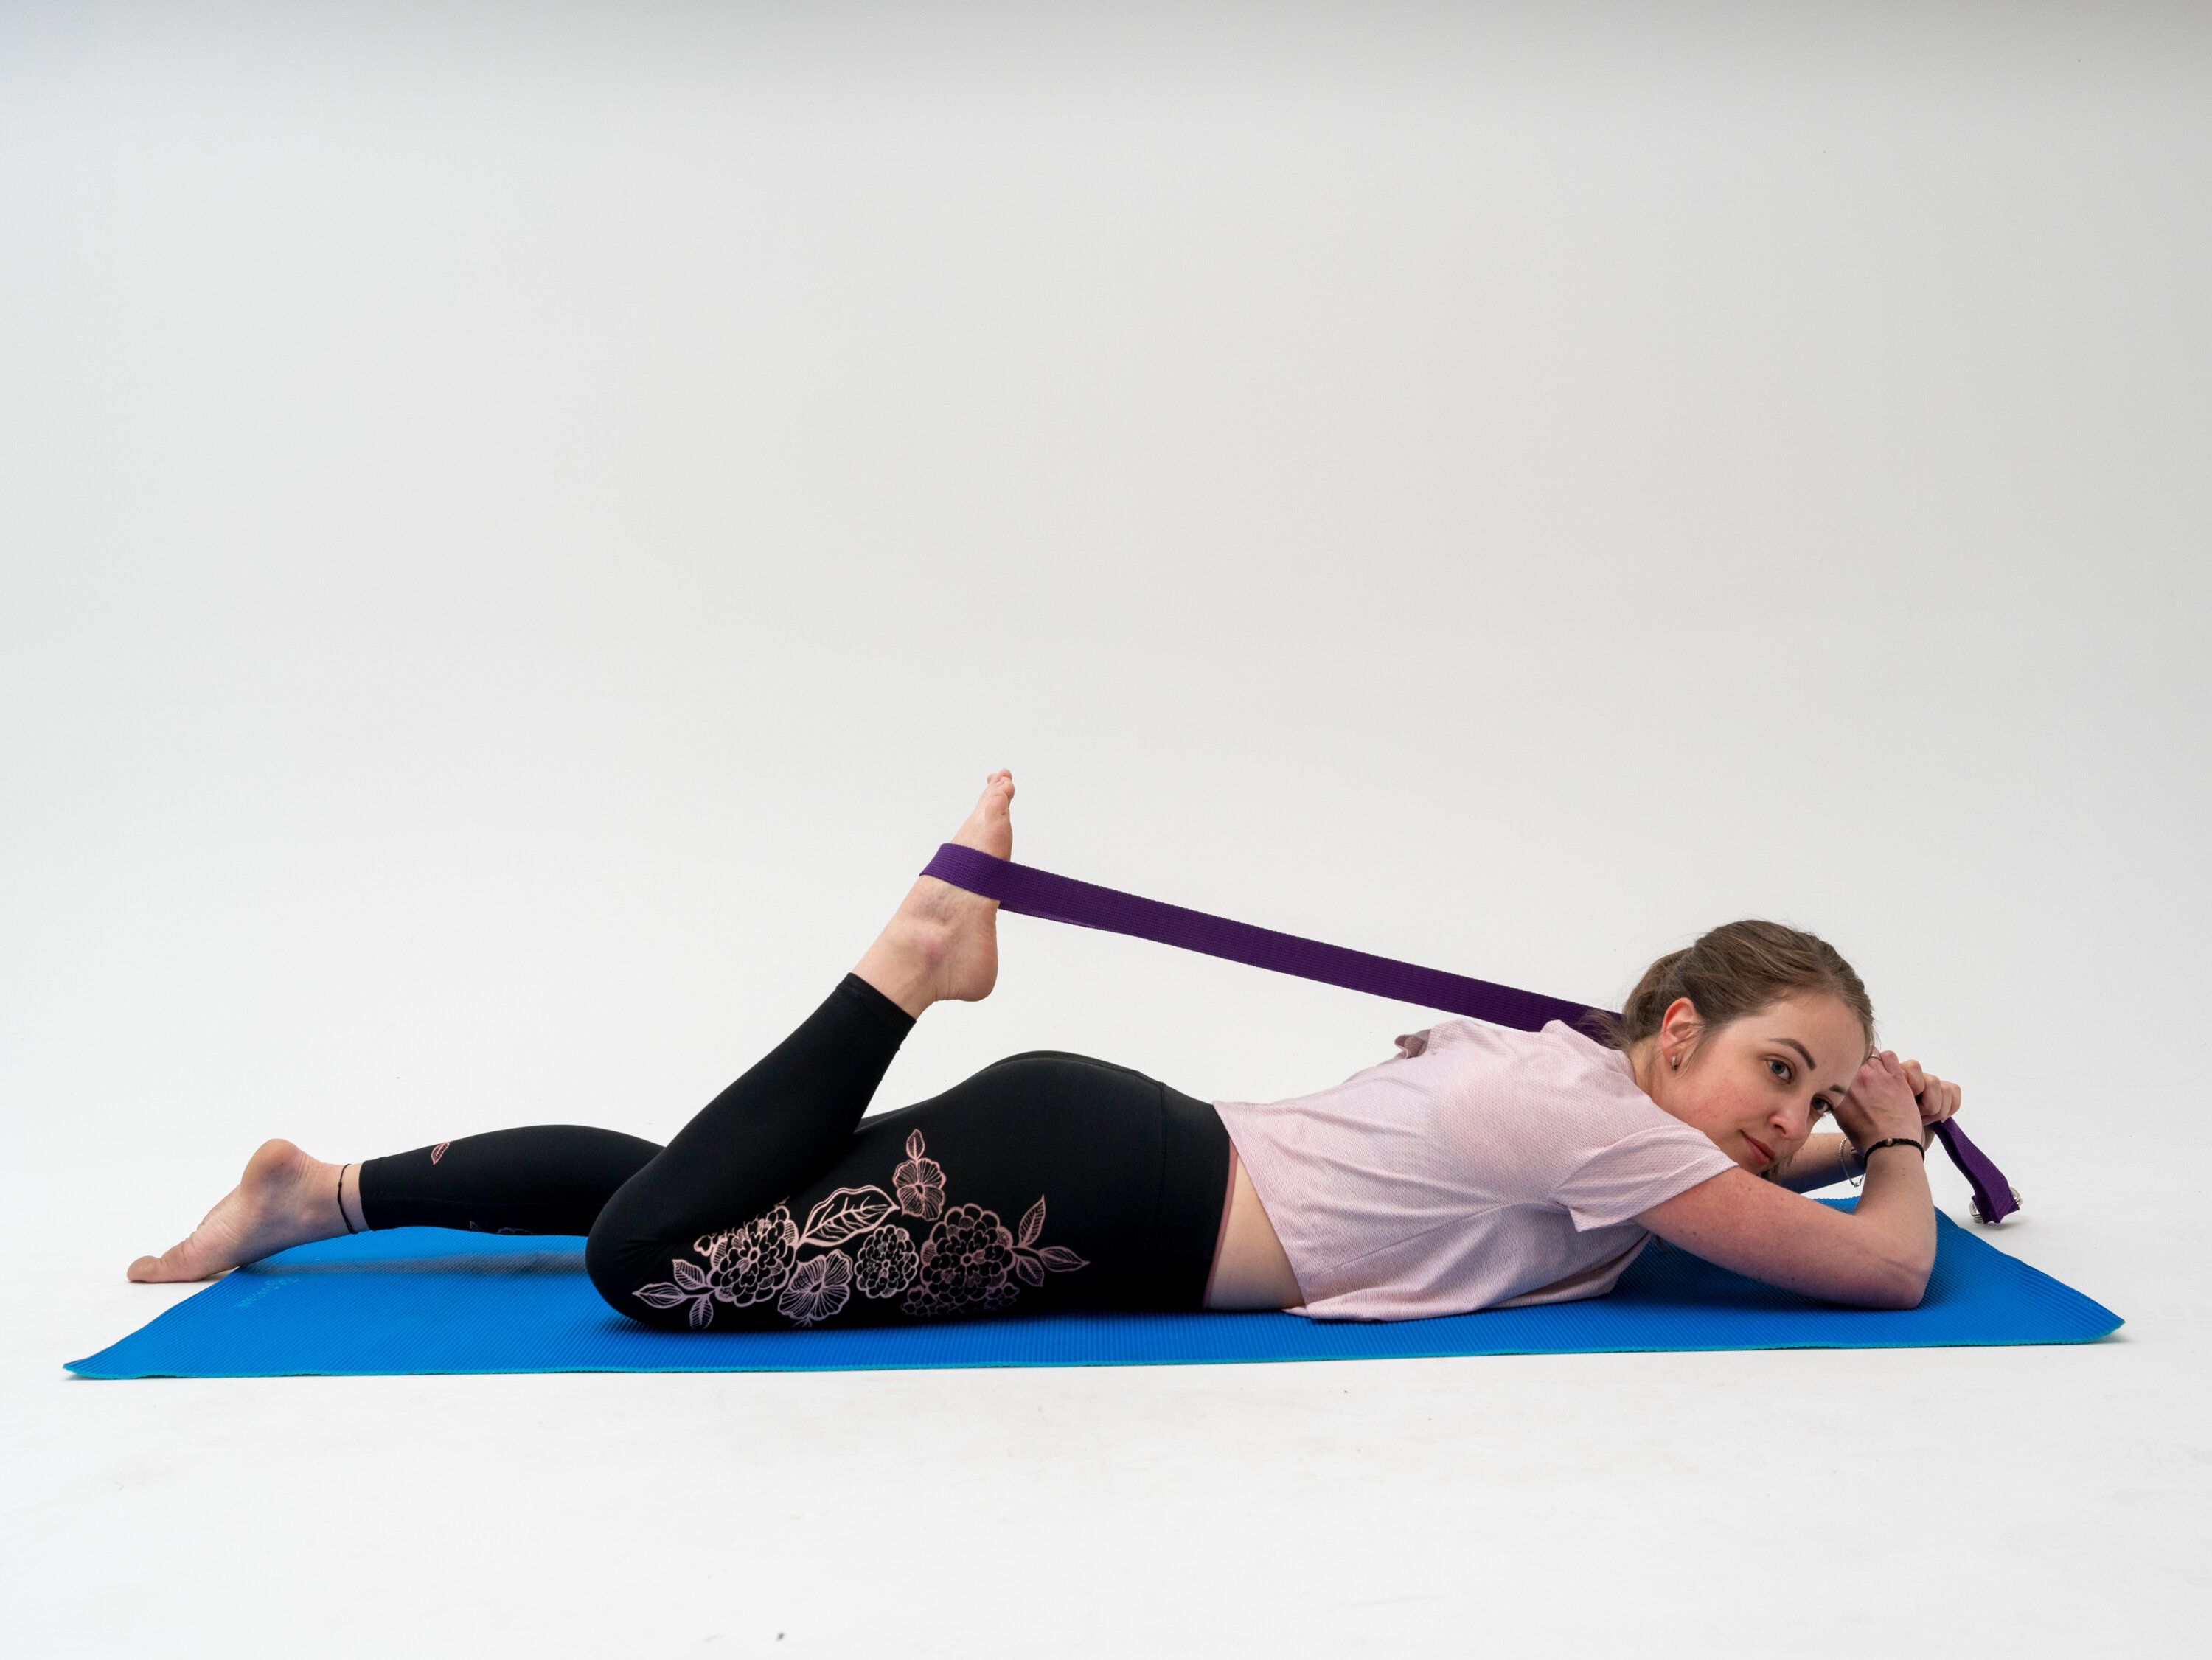 Lying quad stretch with band  Exercise Videos & Guides